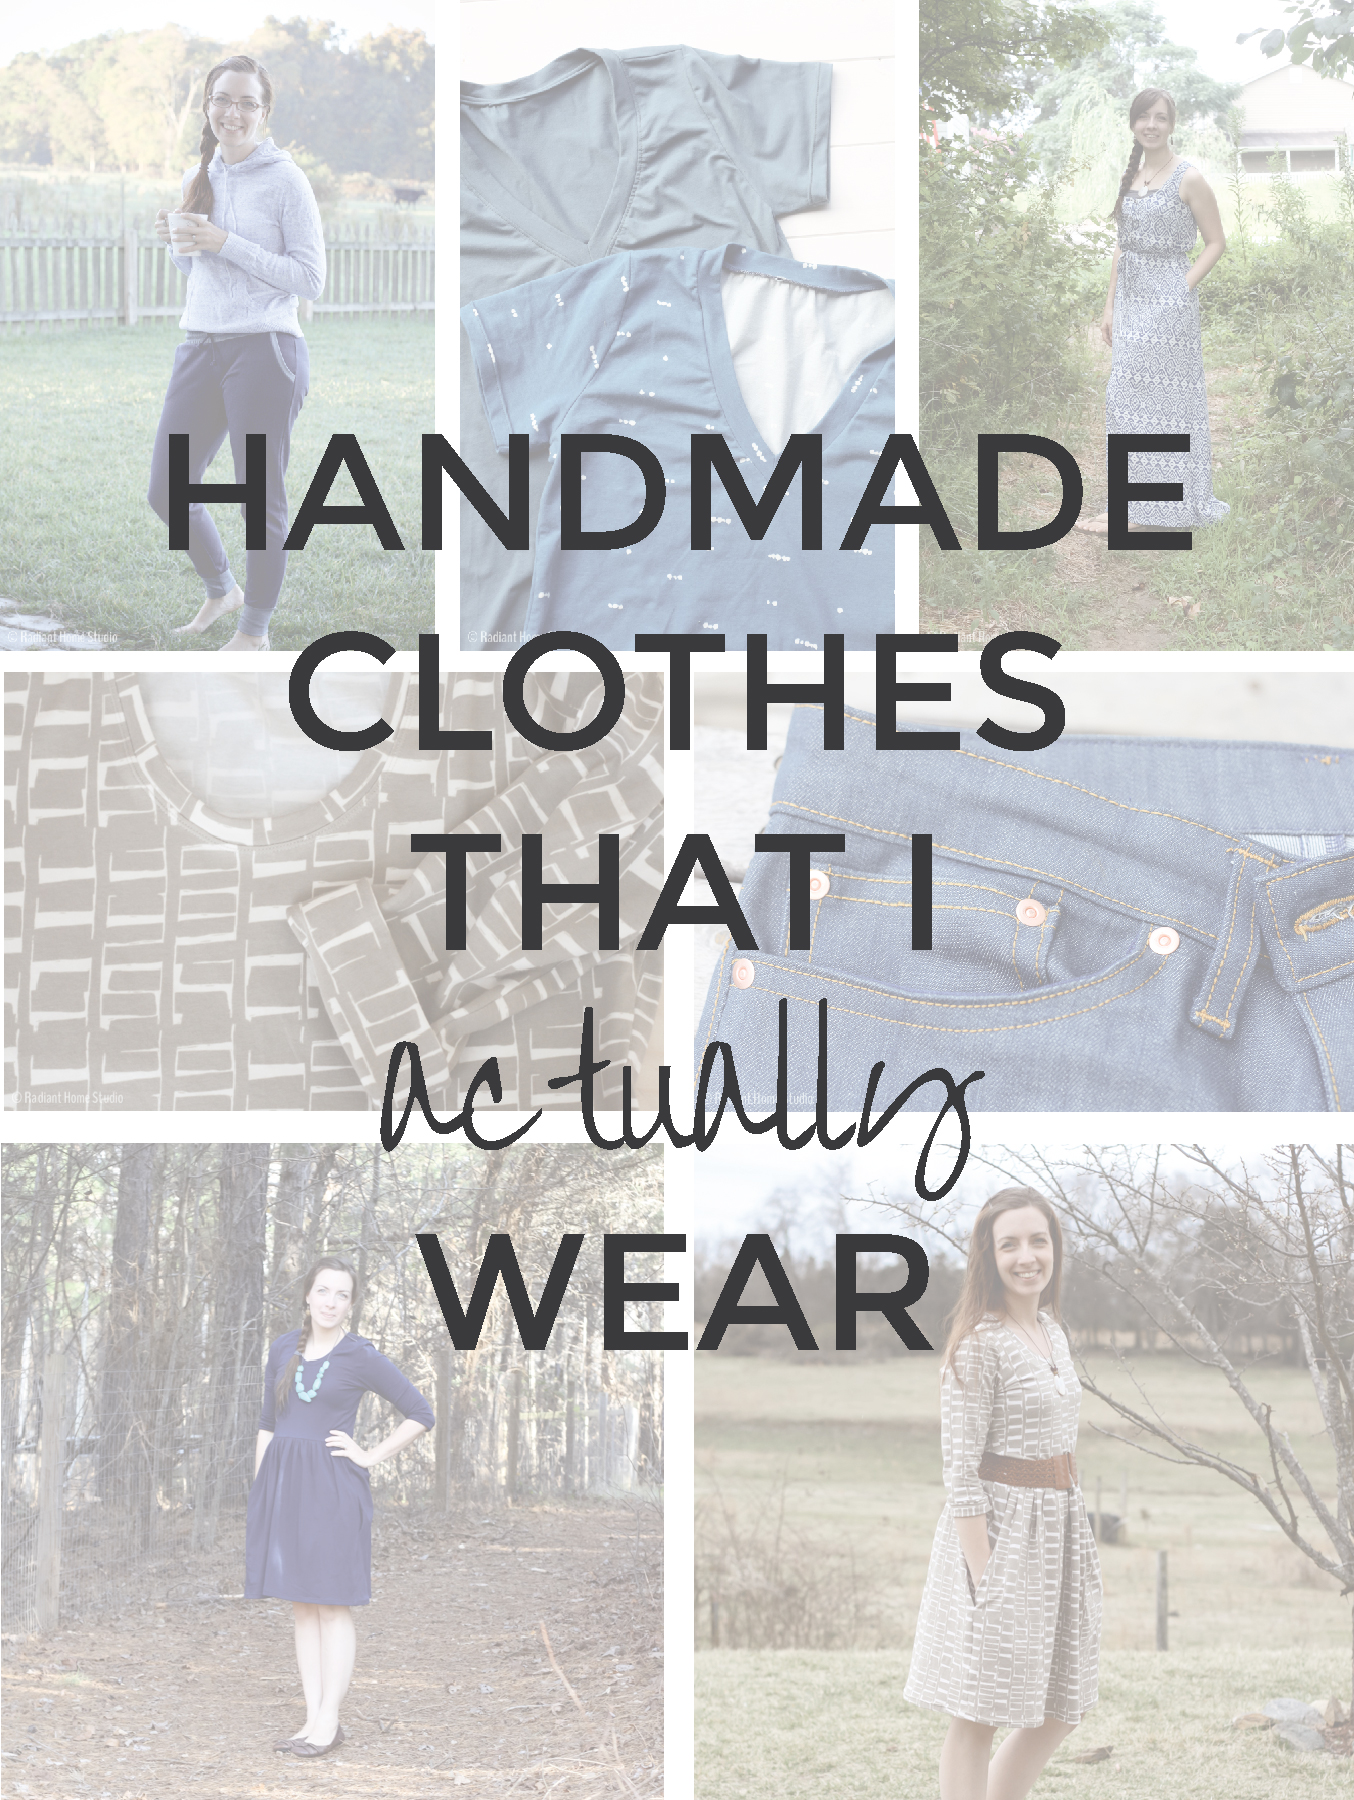 Handmade Clothes That I Actually Wear | Radiant Home Studio